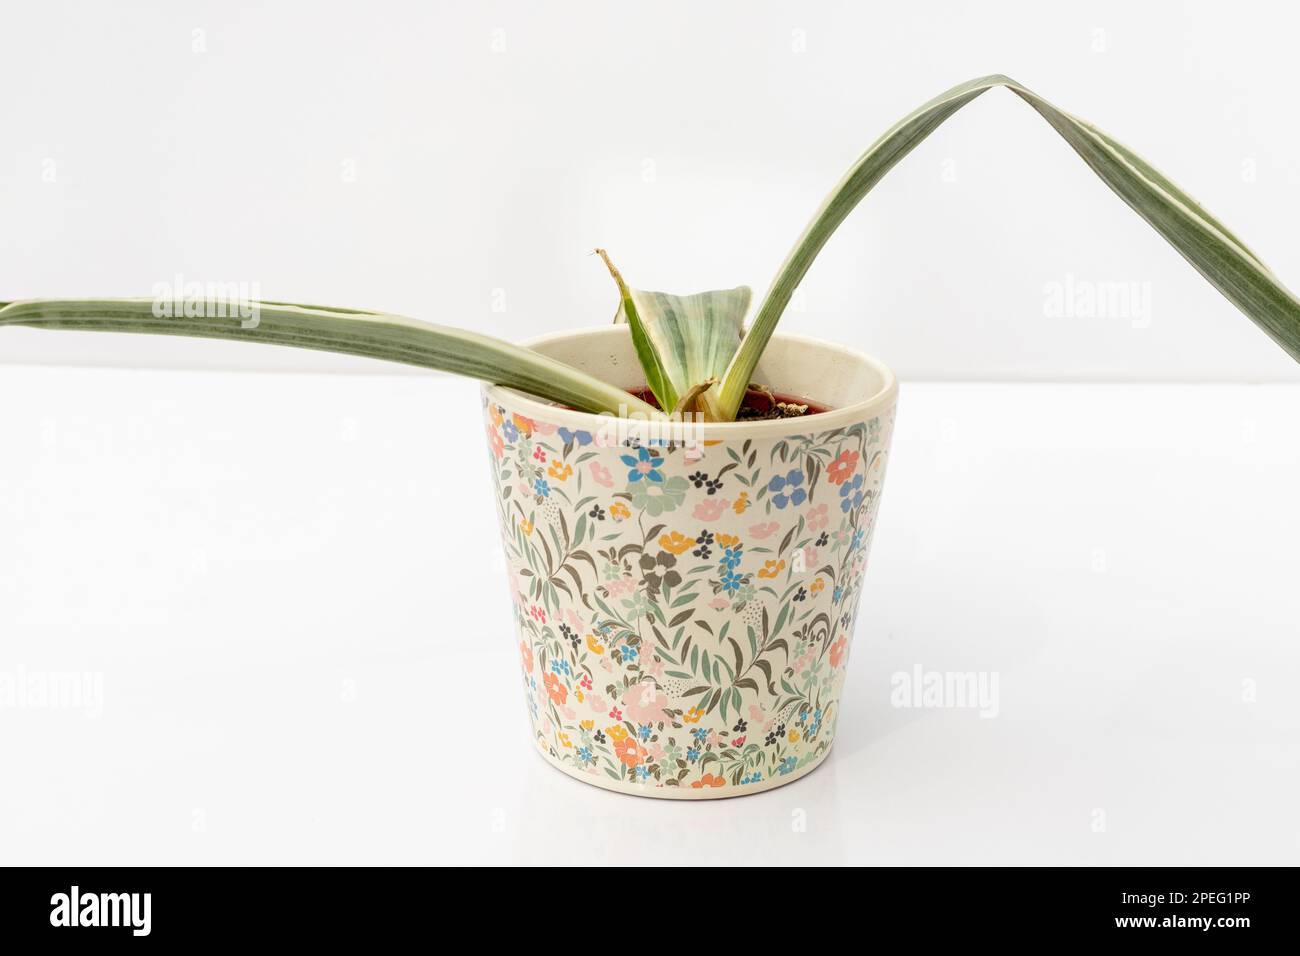 Sansevieria white snake plant root rot in a ceramic pot isolated on white background Stock Photo